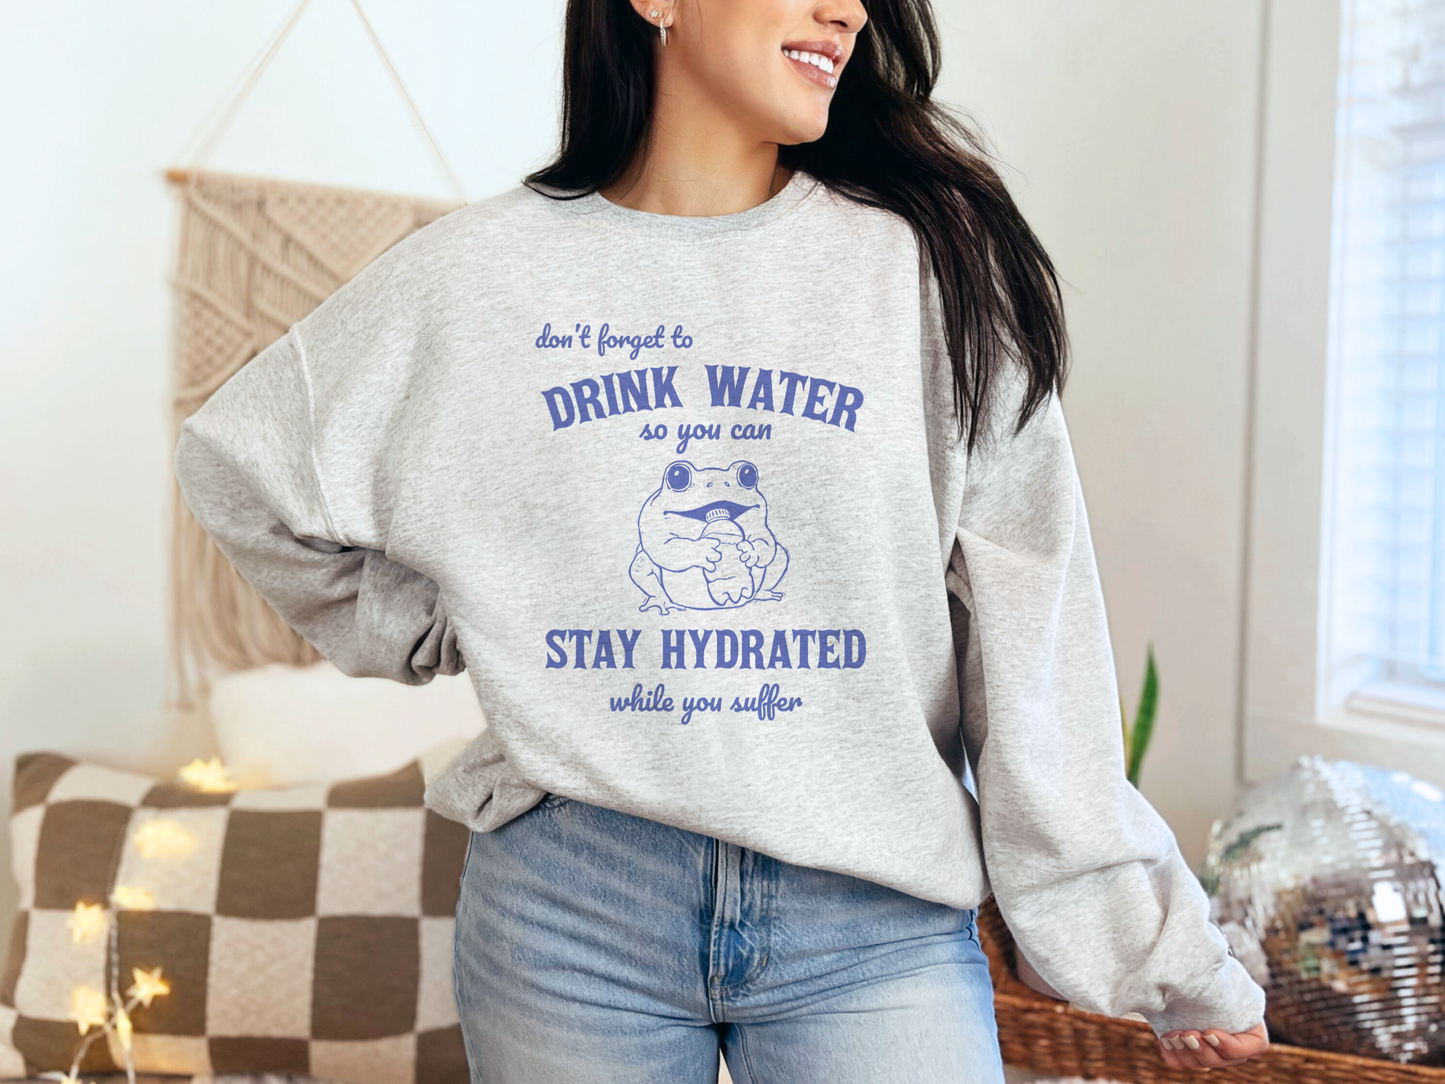 Don’t Forget To Drink Water Graphic T-Shirt or Sweatshirt